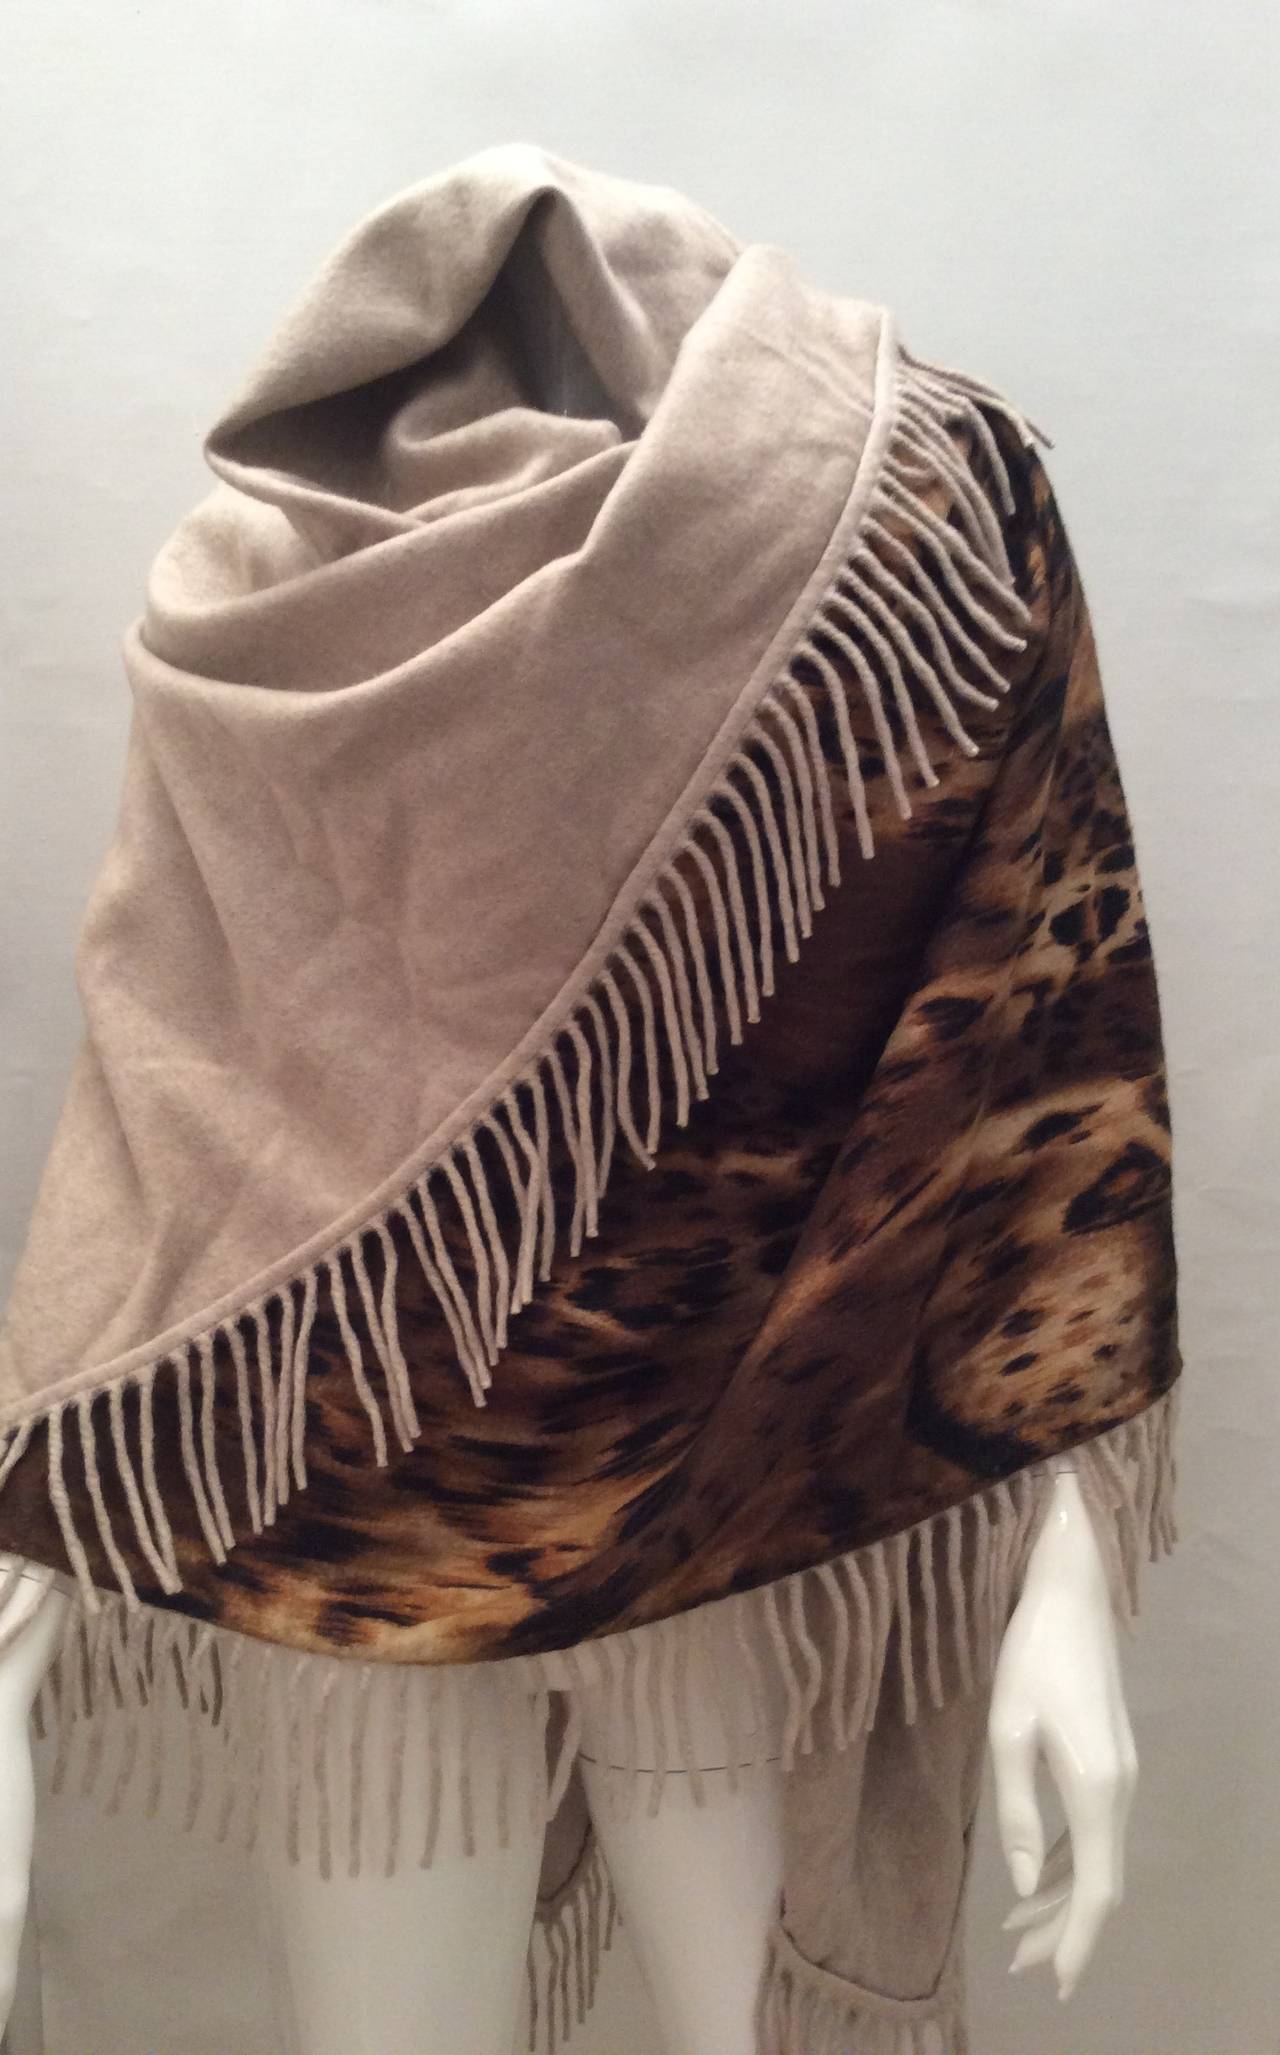 This drop dead beautiful cashmere Loro Piana shawl measures 58 inches by 58 inches. Not including the trim which is 3 inches long. It is 100% cashmere and is a beautiful leopard pattern. It is also reversible to a beautiful solid beige color. The